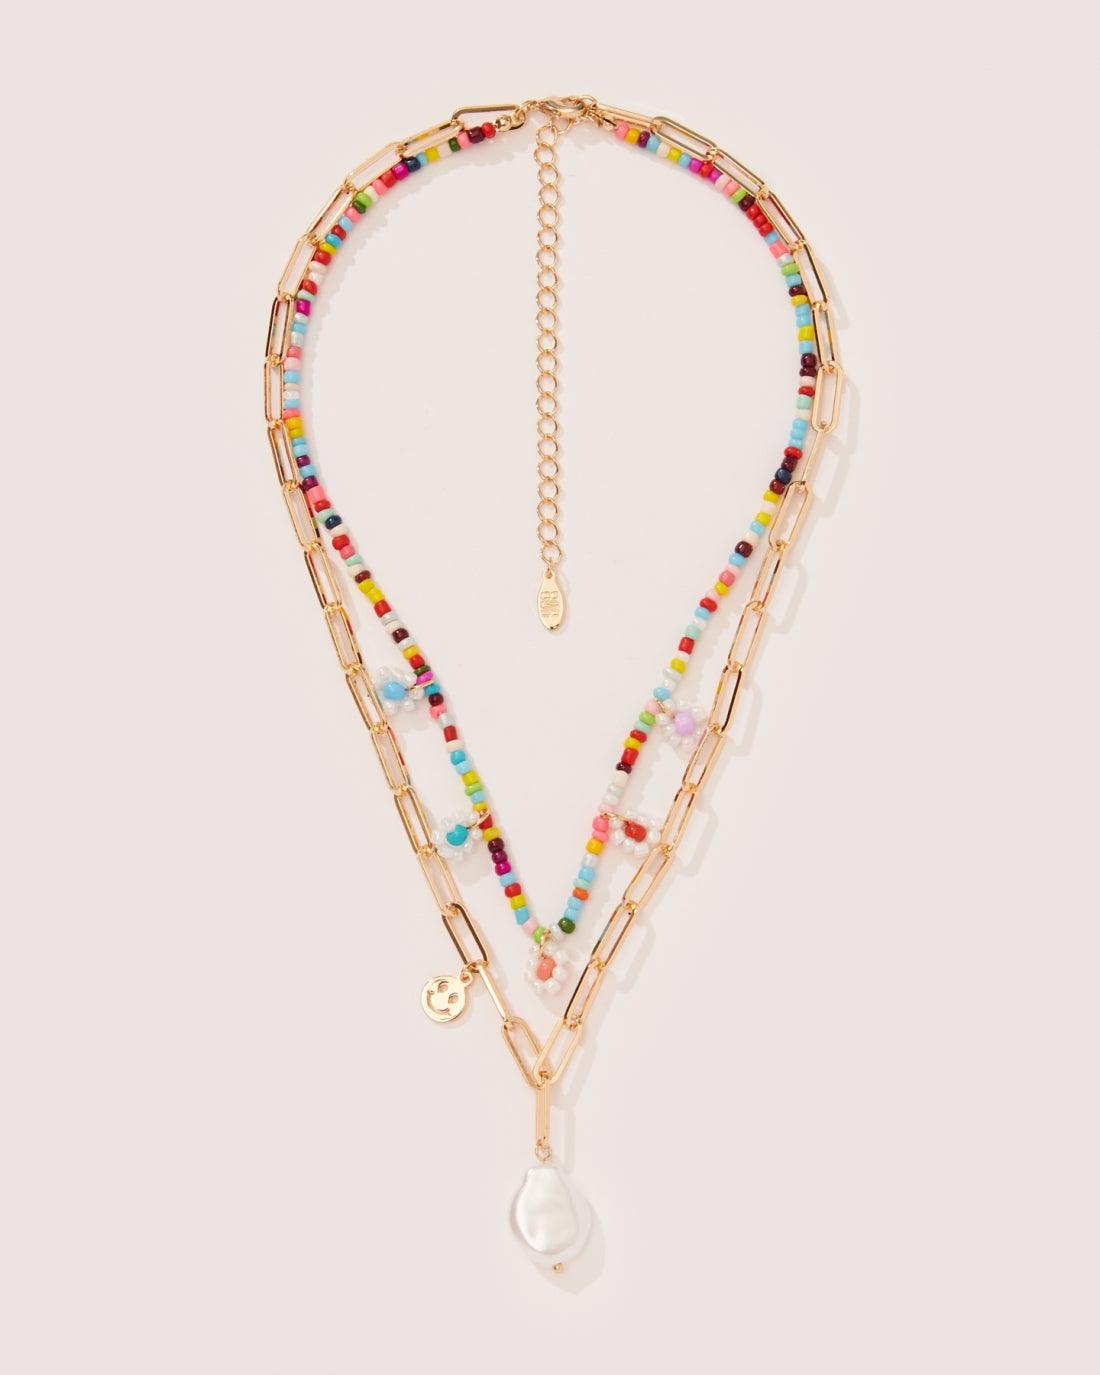 MISS.THANG NECKLACE - 8 Other Reasons